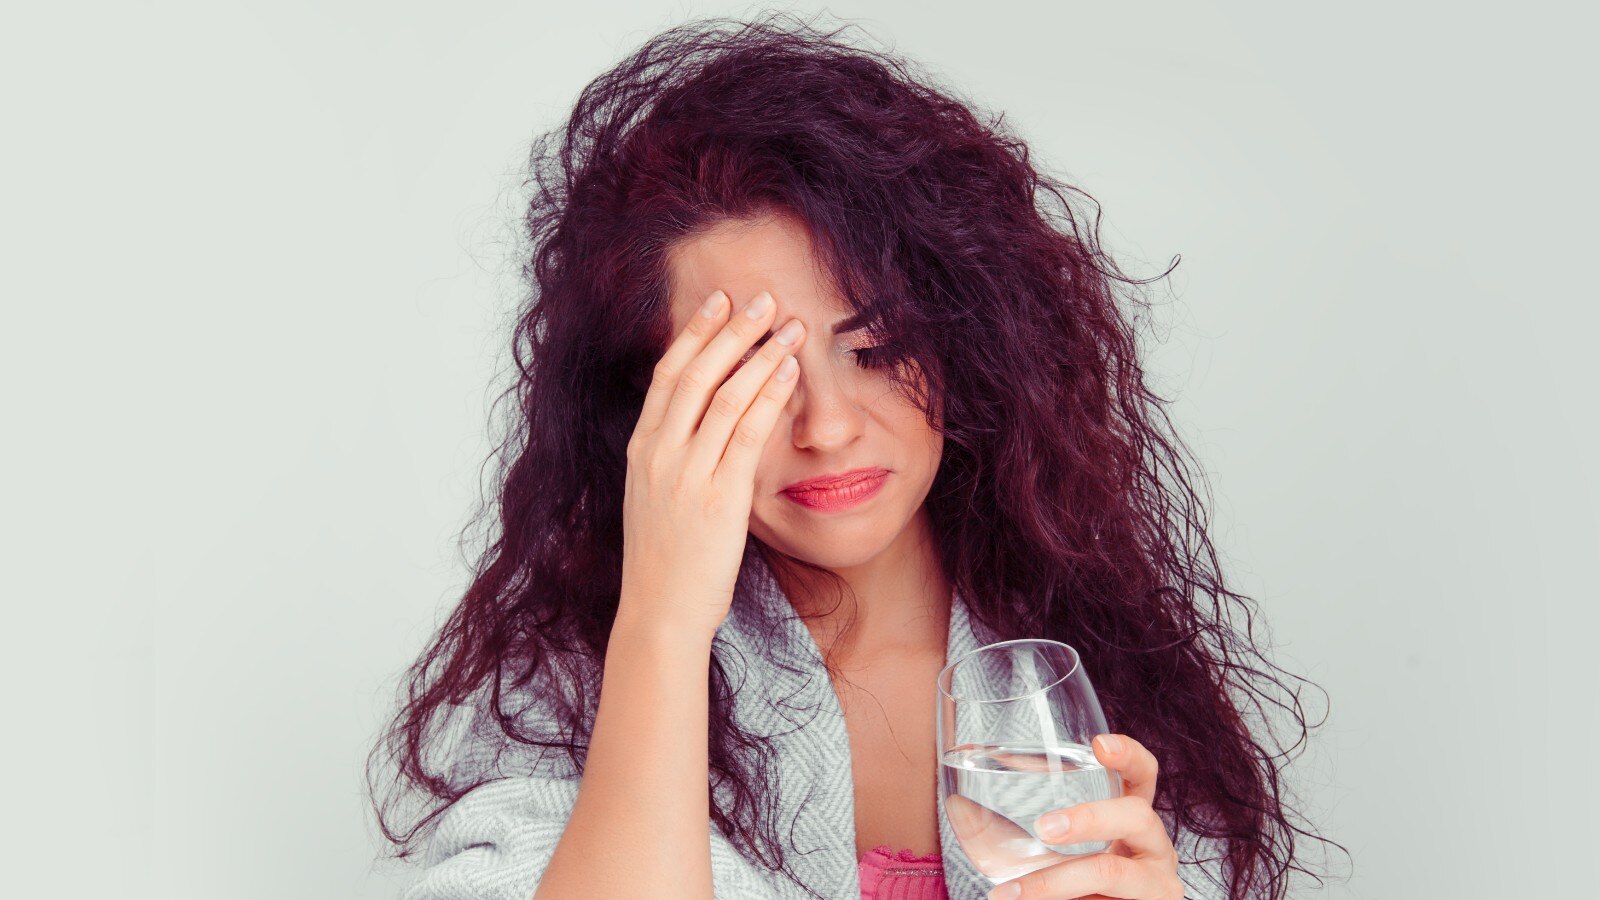 Hangovers: For these 5 reasons, some people experience more hangovers. So I know how to handle it.